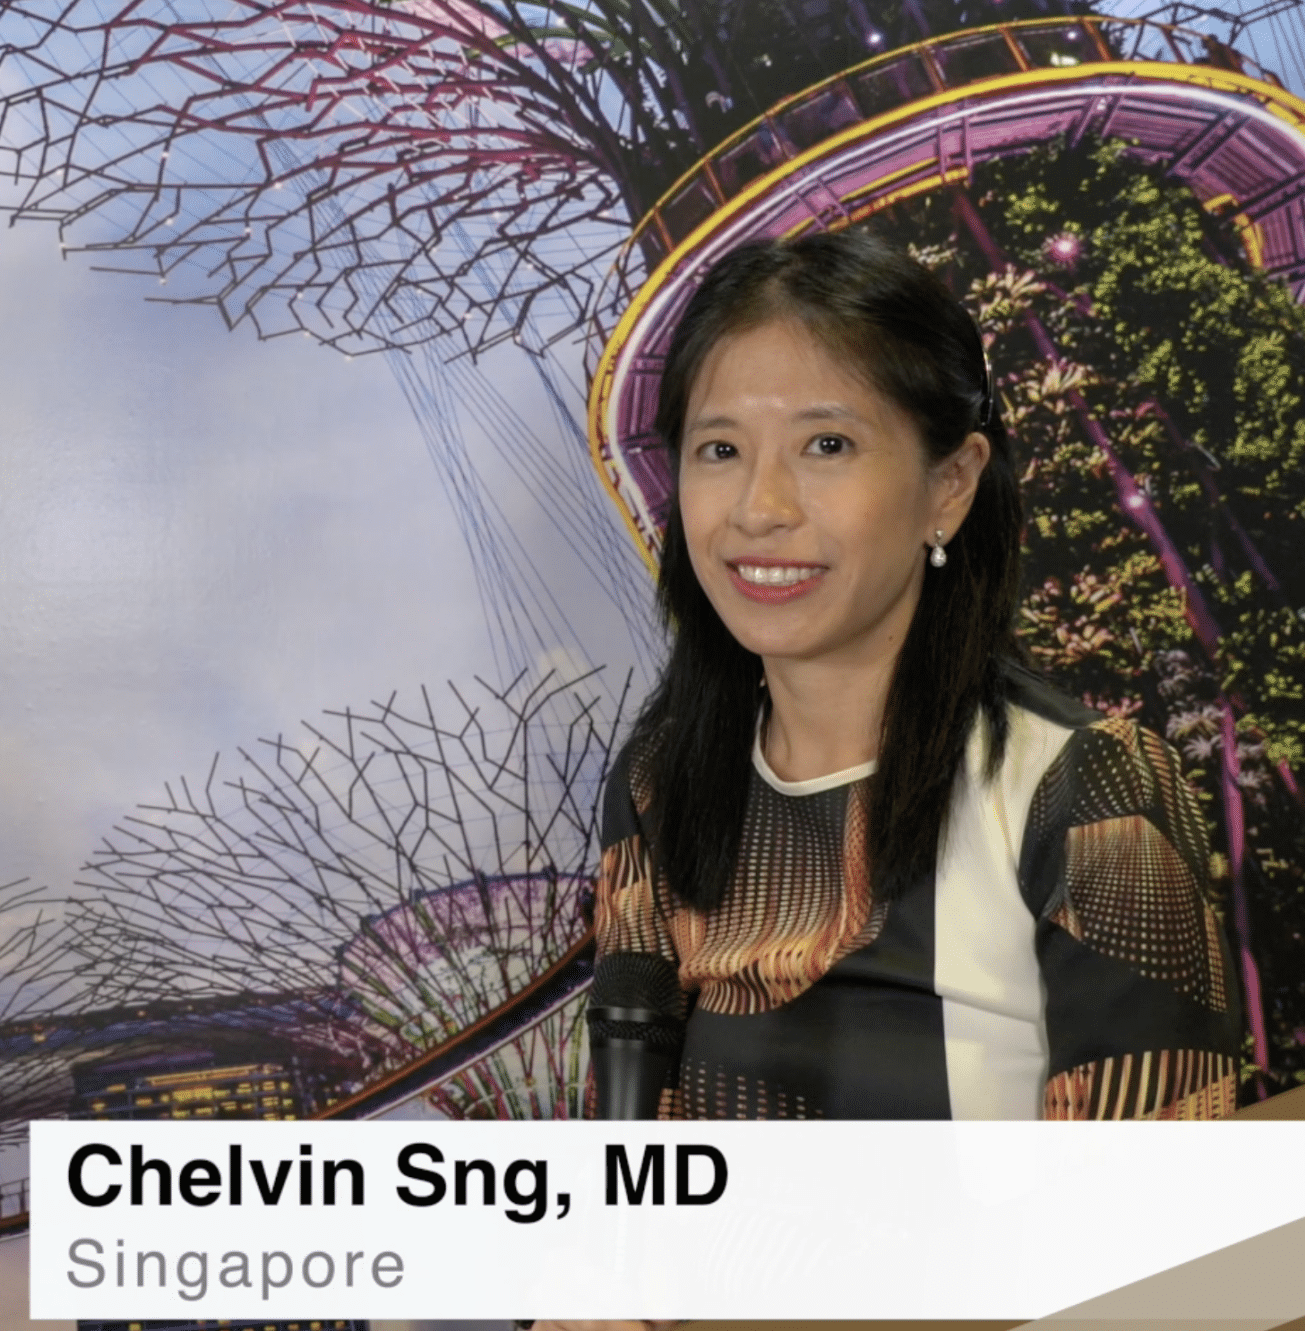 EyeWorld Interview With Dr Chelvin Sng on Hydrus Microstent pdf